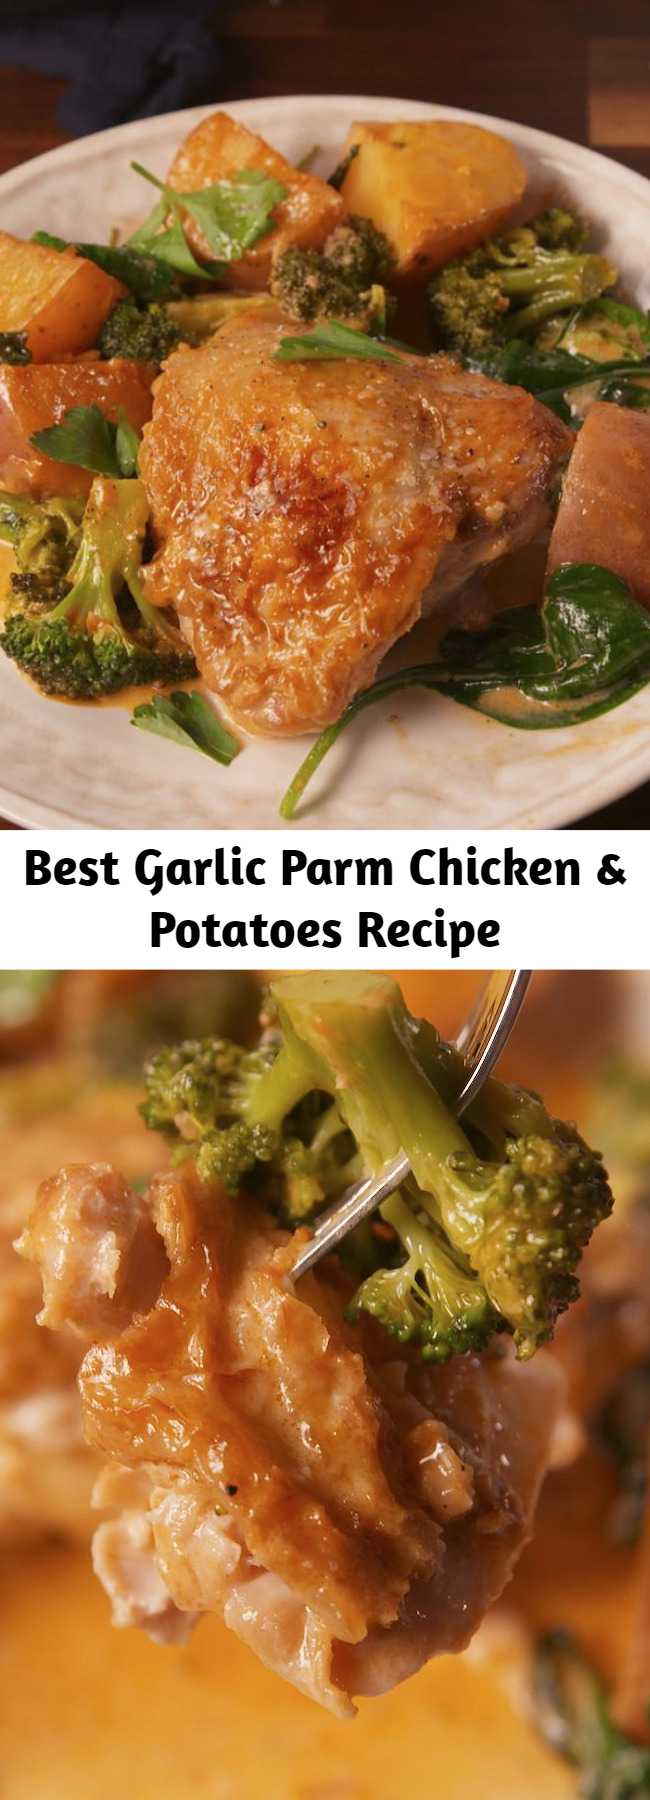 Best Garlic Parm Chicken & Potatoes Recipe - A creamy one pot dish that we are absolutely here for. #food #easyrecipe #easyrecipe #familydinner #chicken